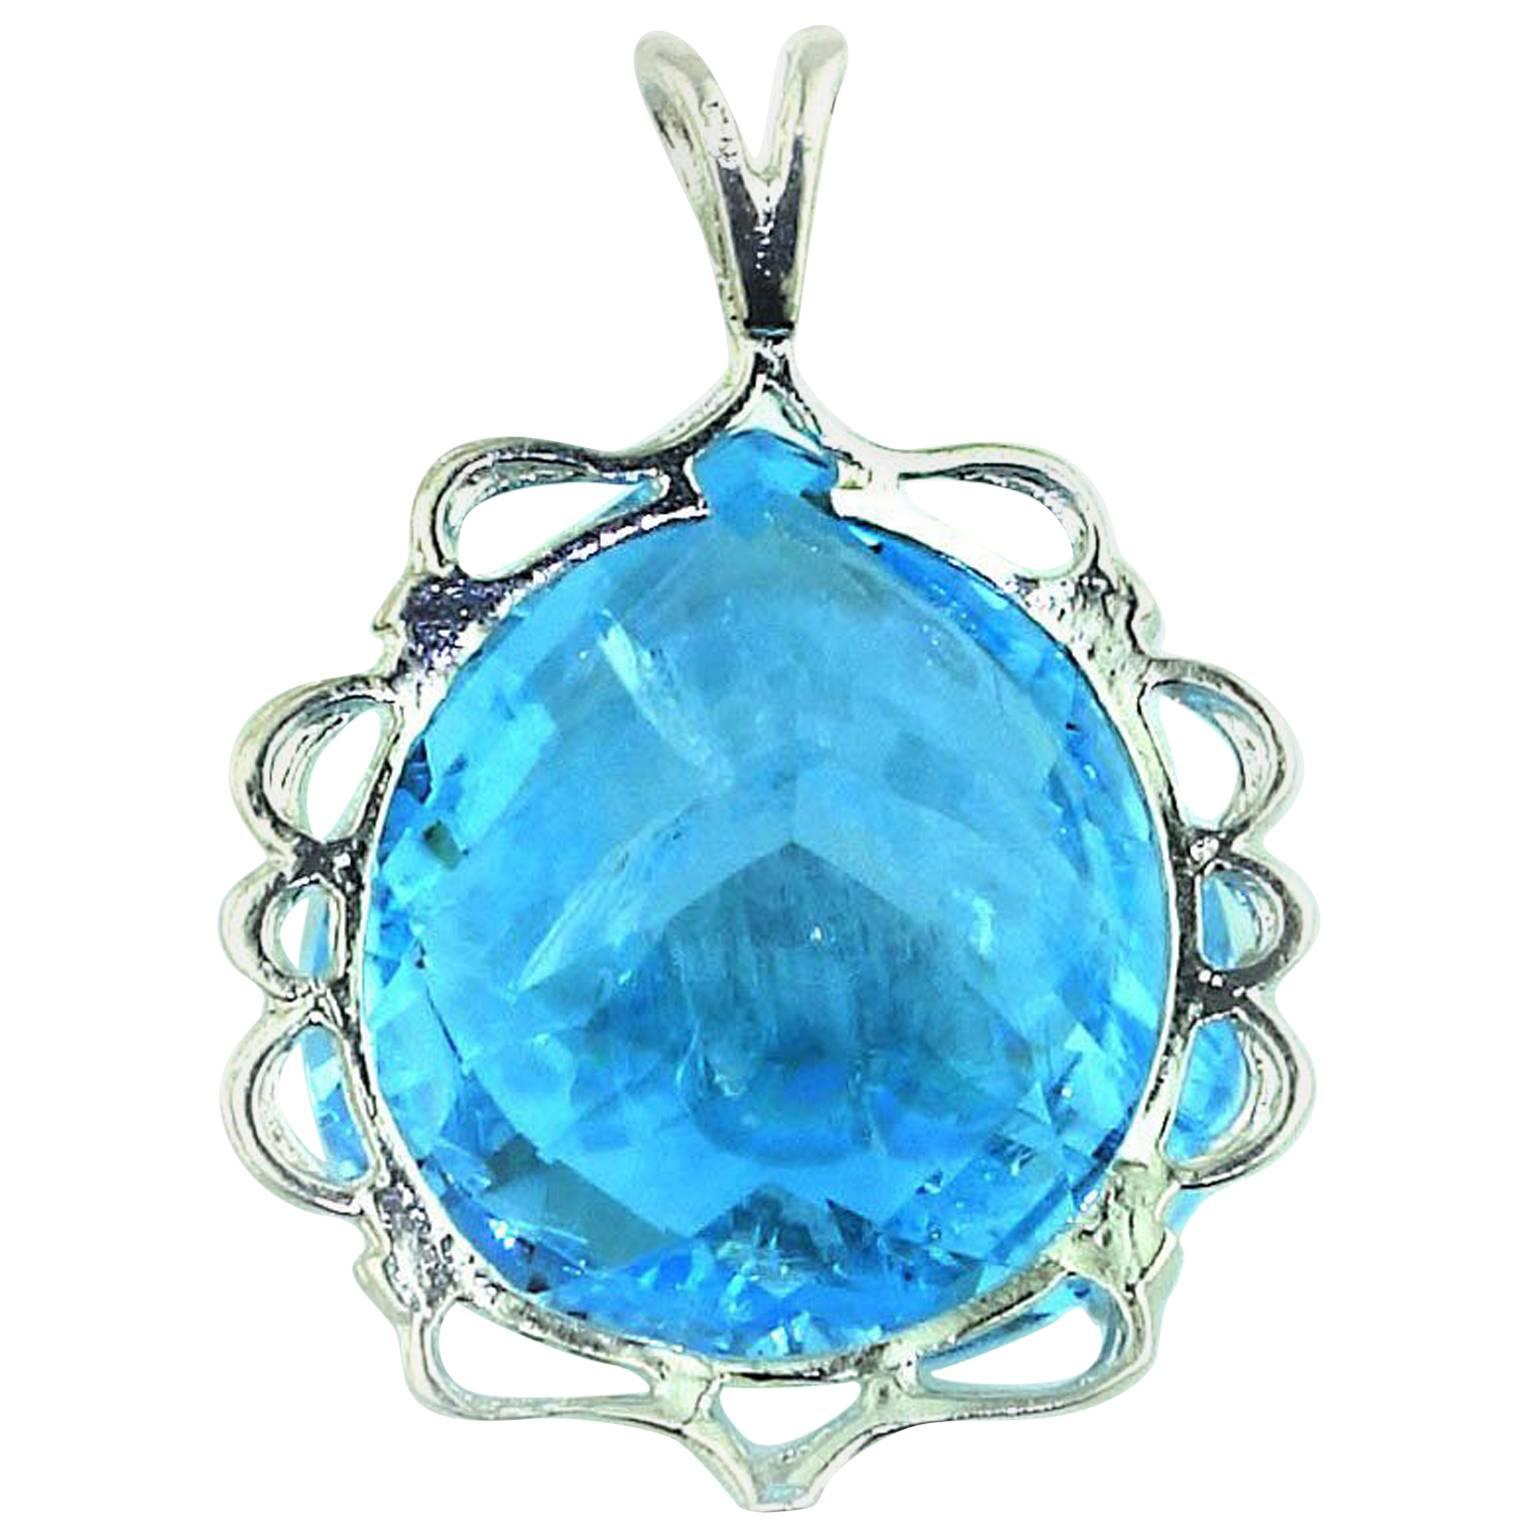 Huge 78 carat sparkling Blue Topaz in Sterling Silver Pendant.  This is a fat pear shape gemstone with a checkerboard table, the natural inclusions add to the sparkle.  We found this fabulous one of a kind in Belo Horizonte, Minas Gerais, Brazil